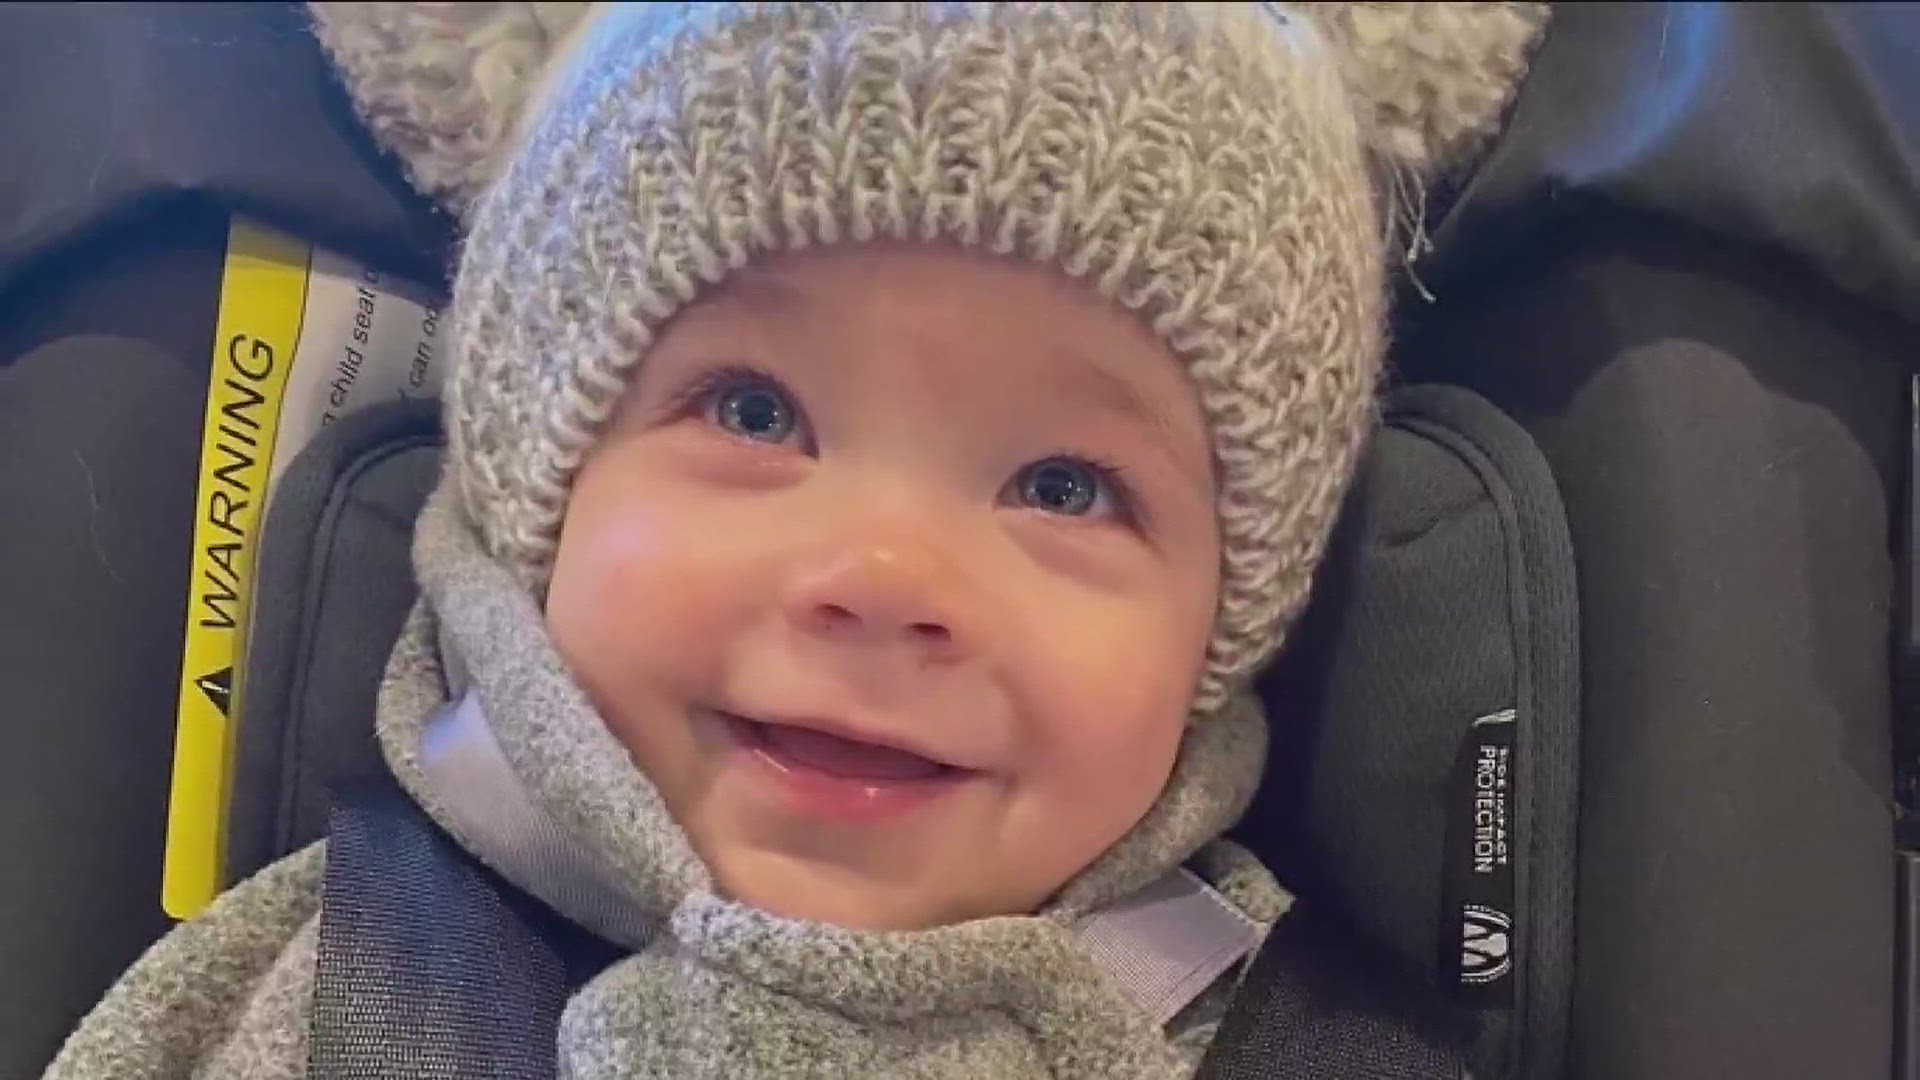 An Atlanta family is hoping to raise awareness on the urgent need for blood marrow donors following the search for a perfect match for their two-year-old son.